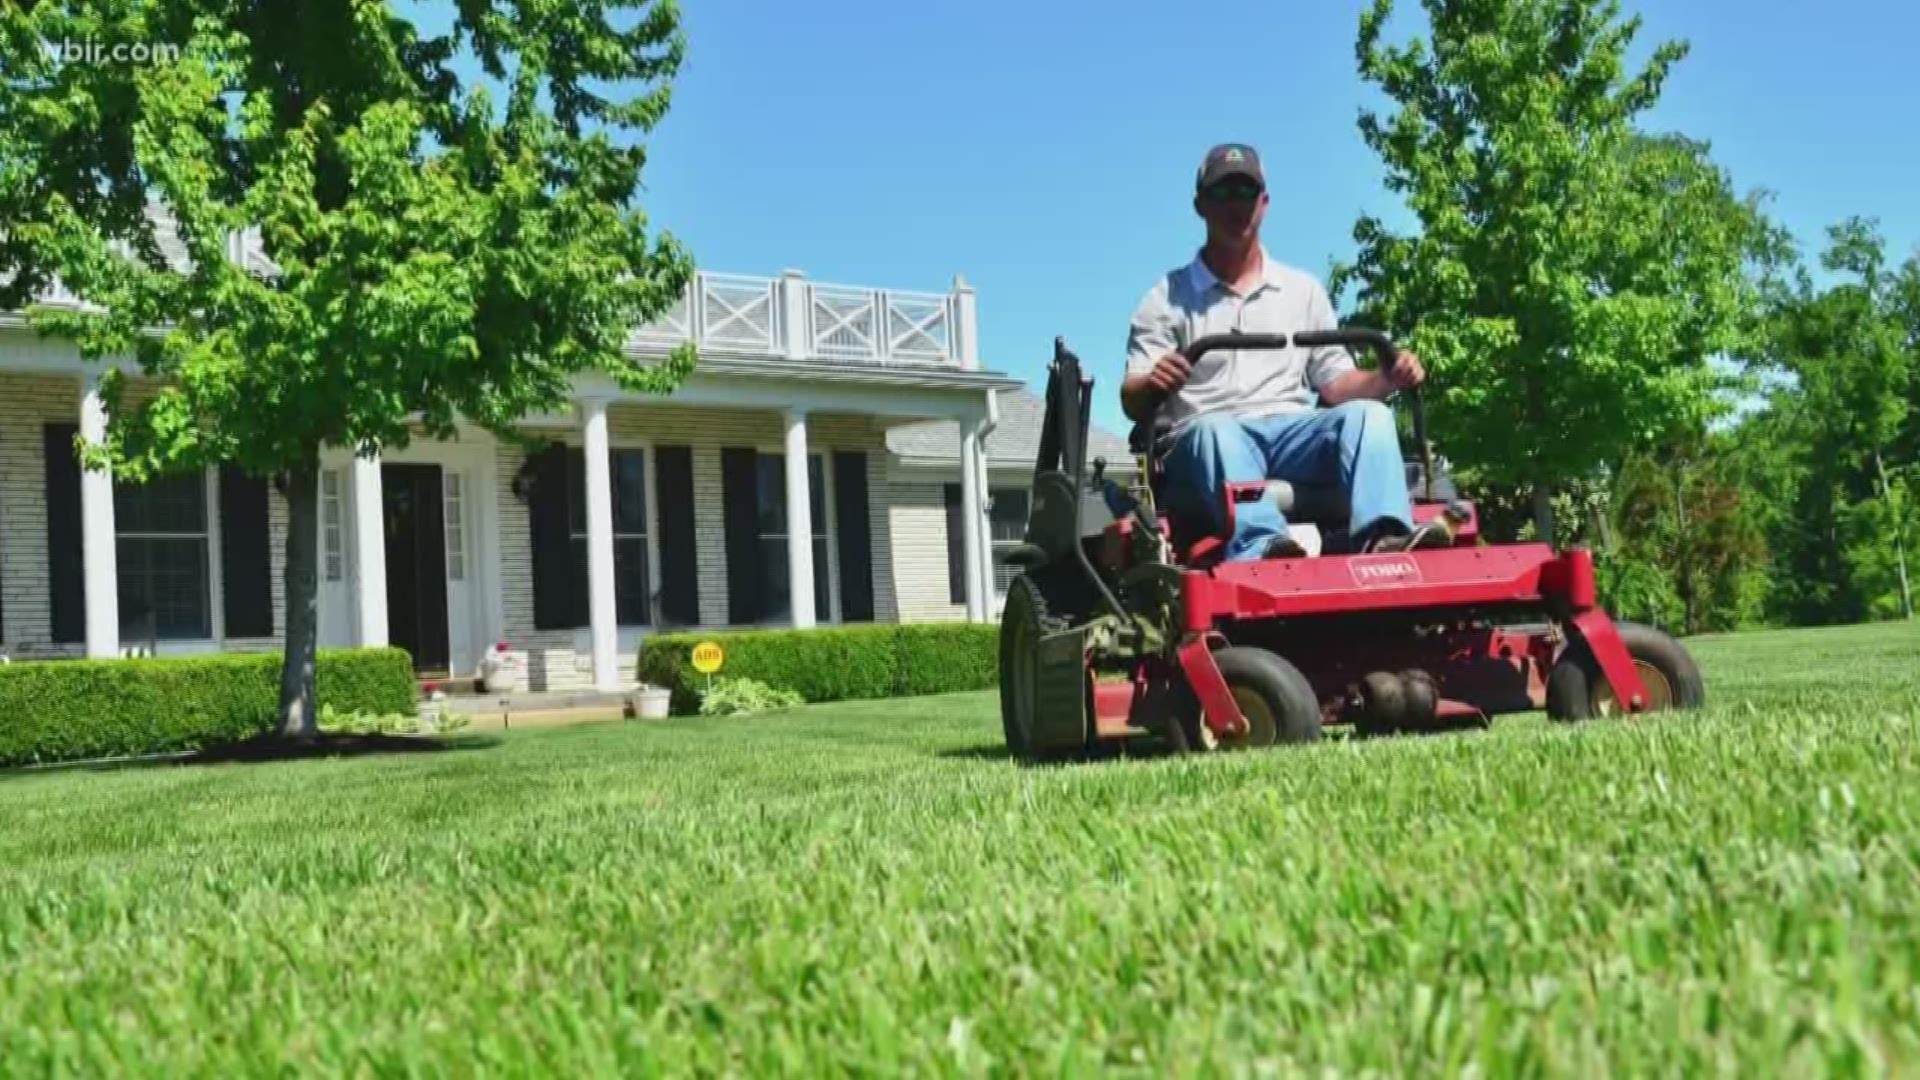 The "Uber for Lawn Care" is up and running in the Knoxville area.